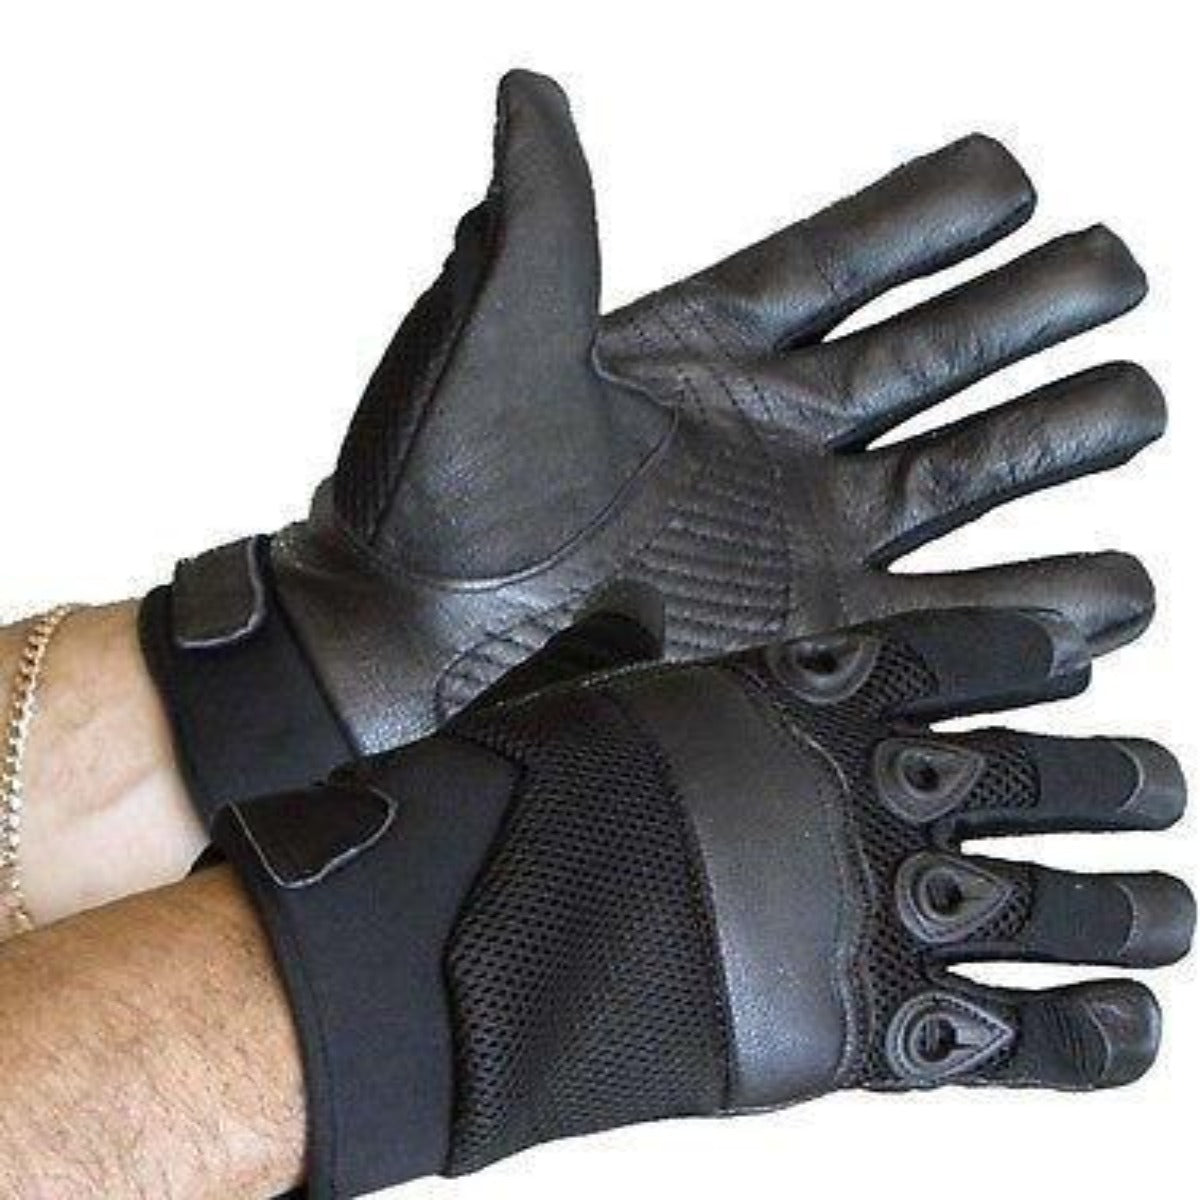 Vance Leather Vented Racing Gloves